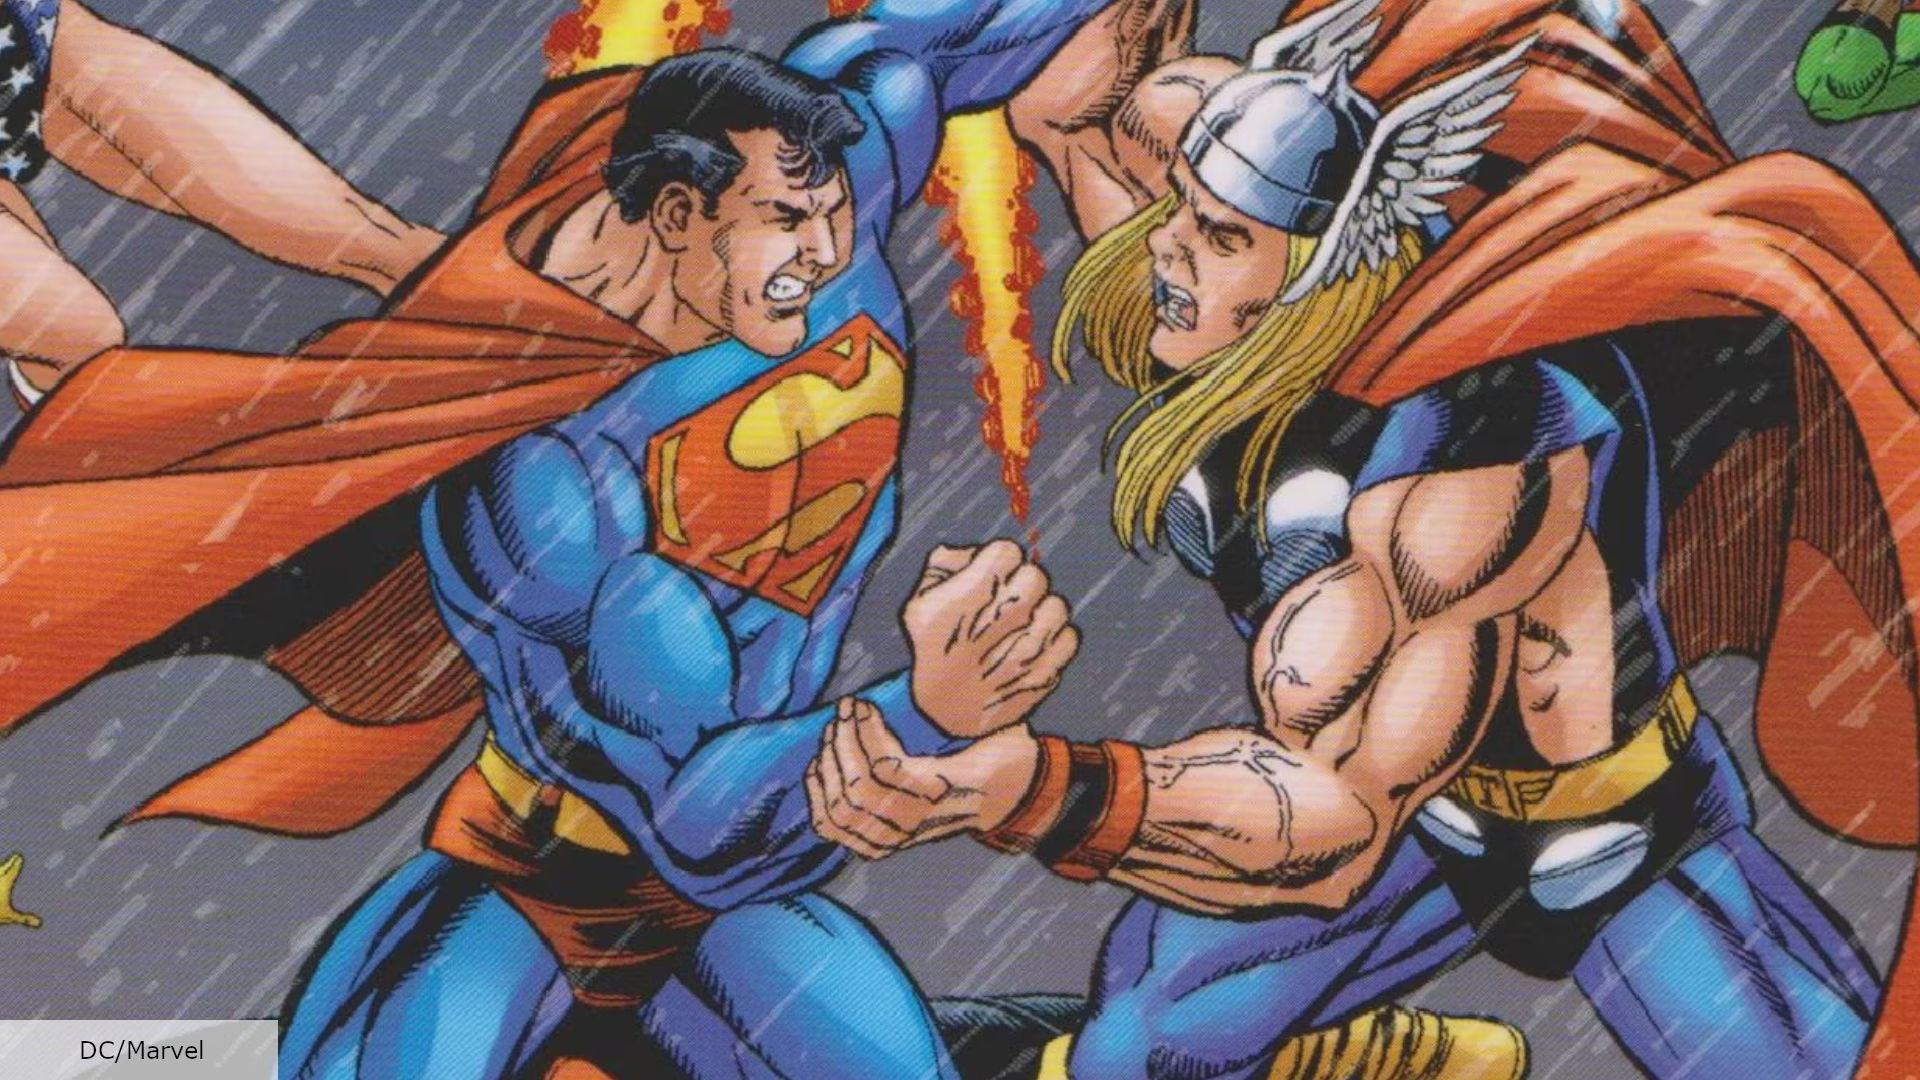 Superman vs Thor: Which superhero would win in a fight? | The Digital Fix